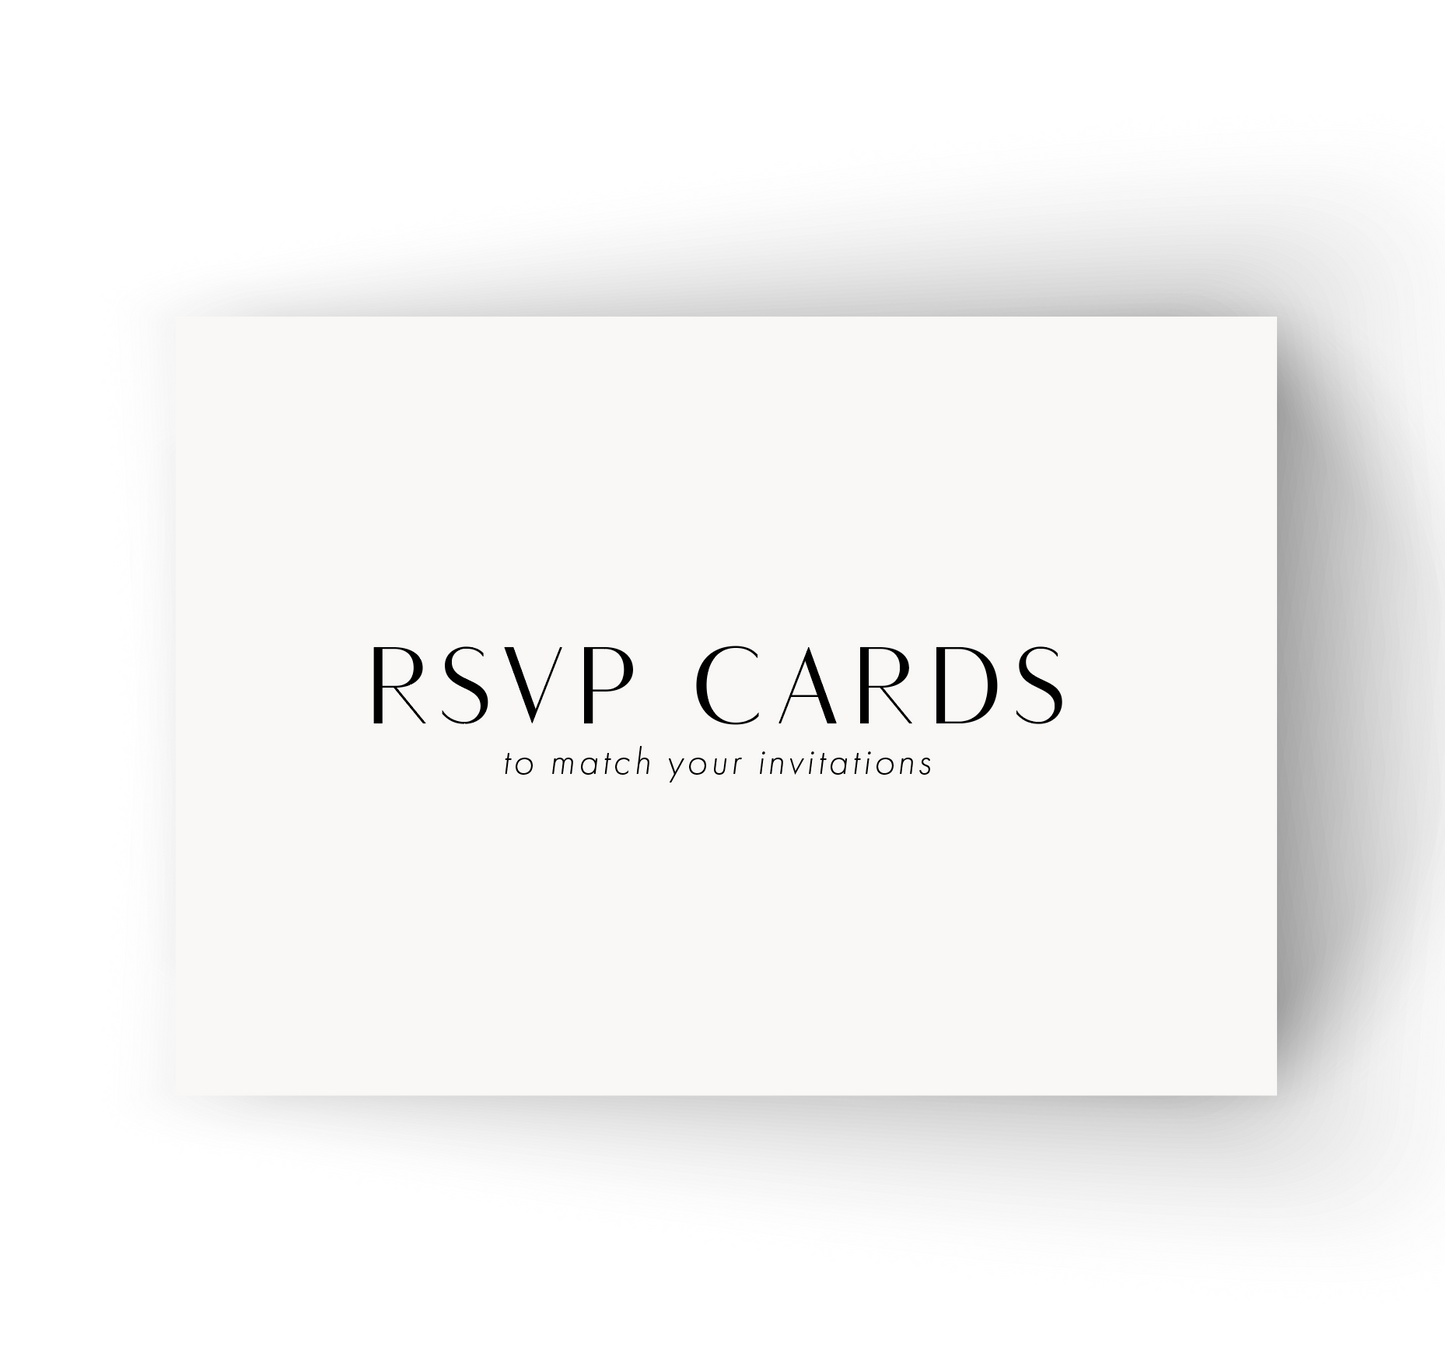 RSVP CARDS to match your invitations